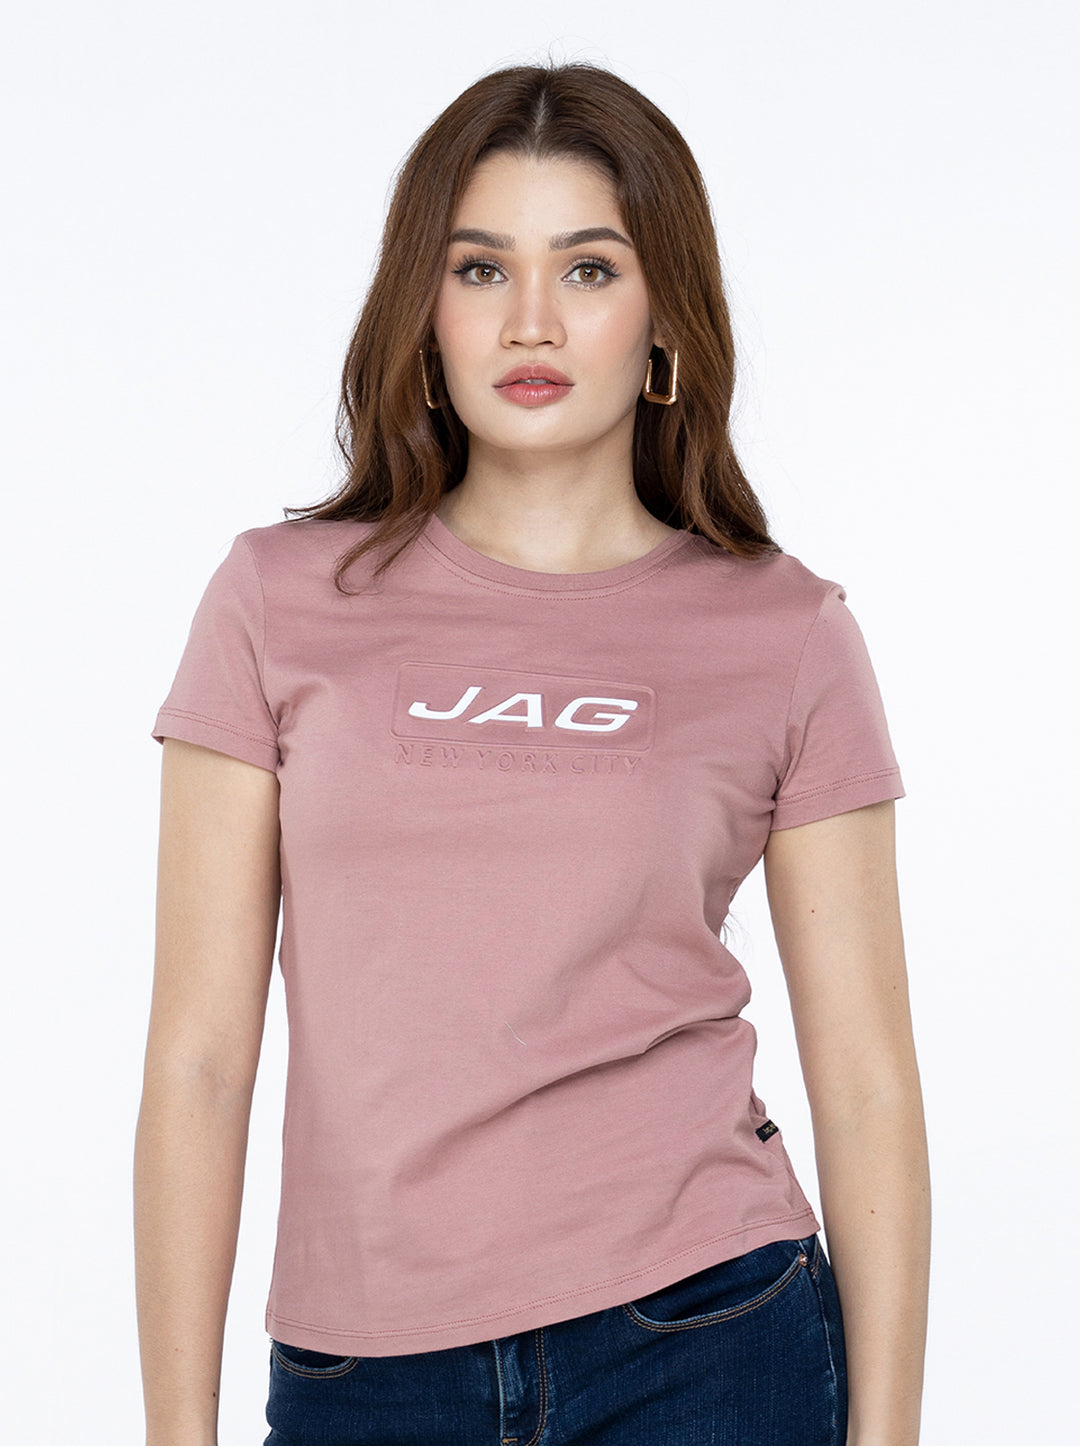 Jag Ladies Relaxed Fit Logo Tee